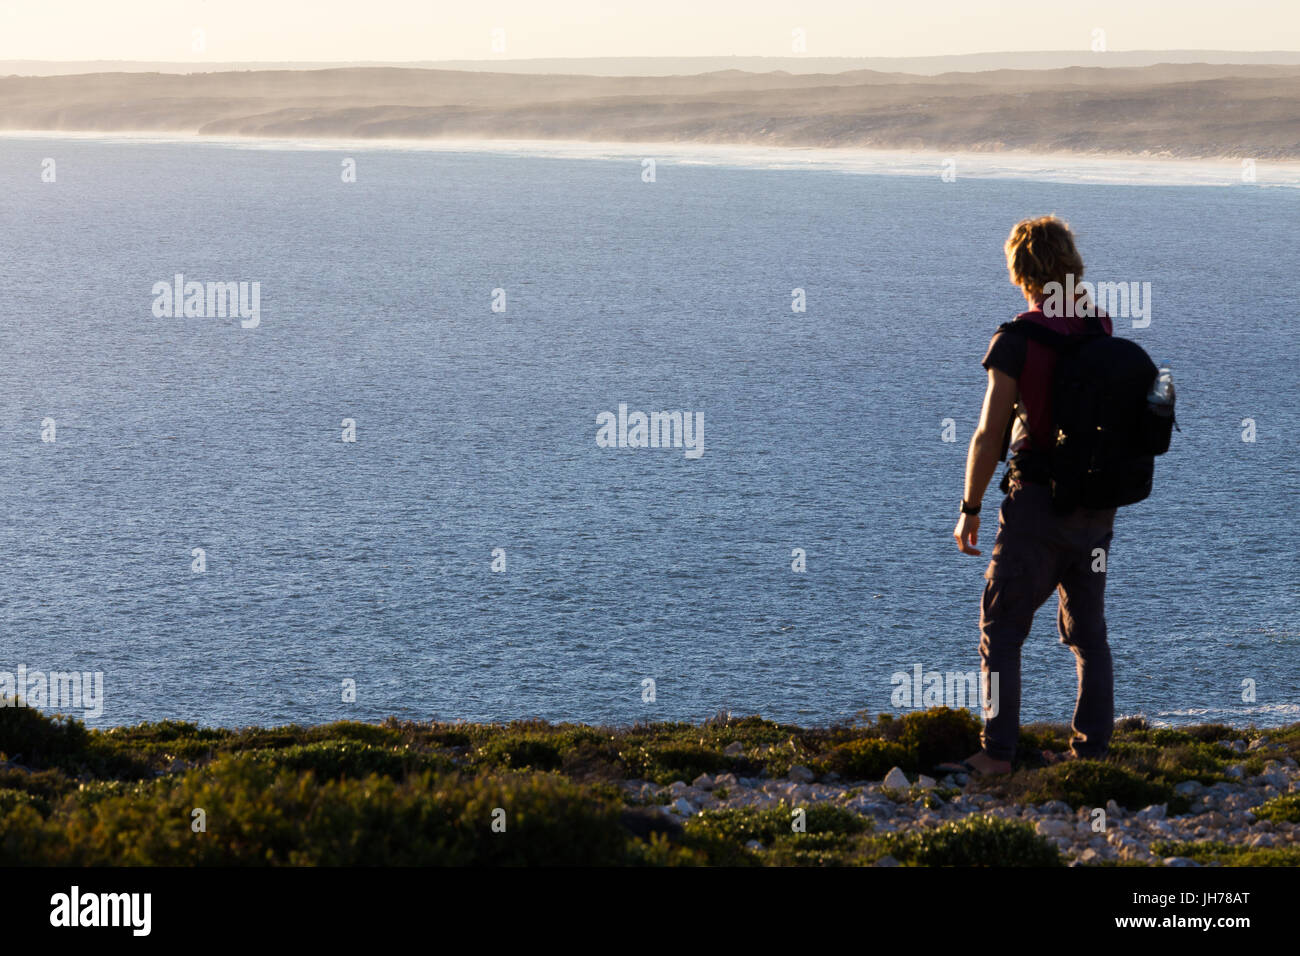 A hiker stops to look at a distant view of a beautiful coastline from a high view point above the sea in southern Australia. Stock Photo